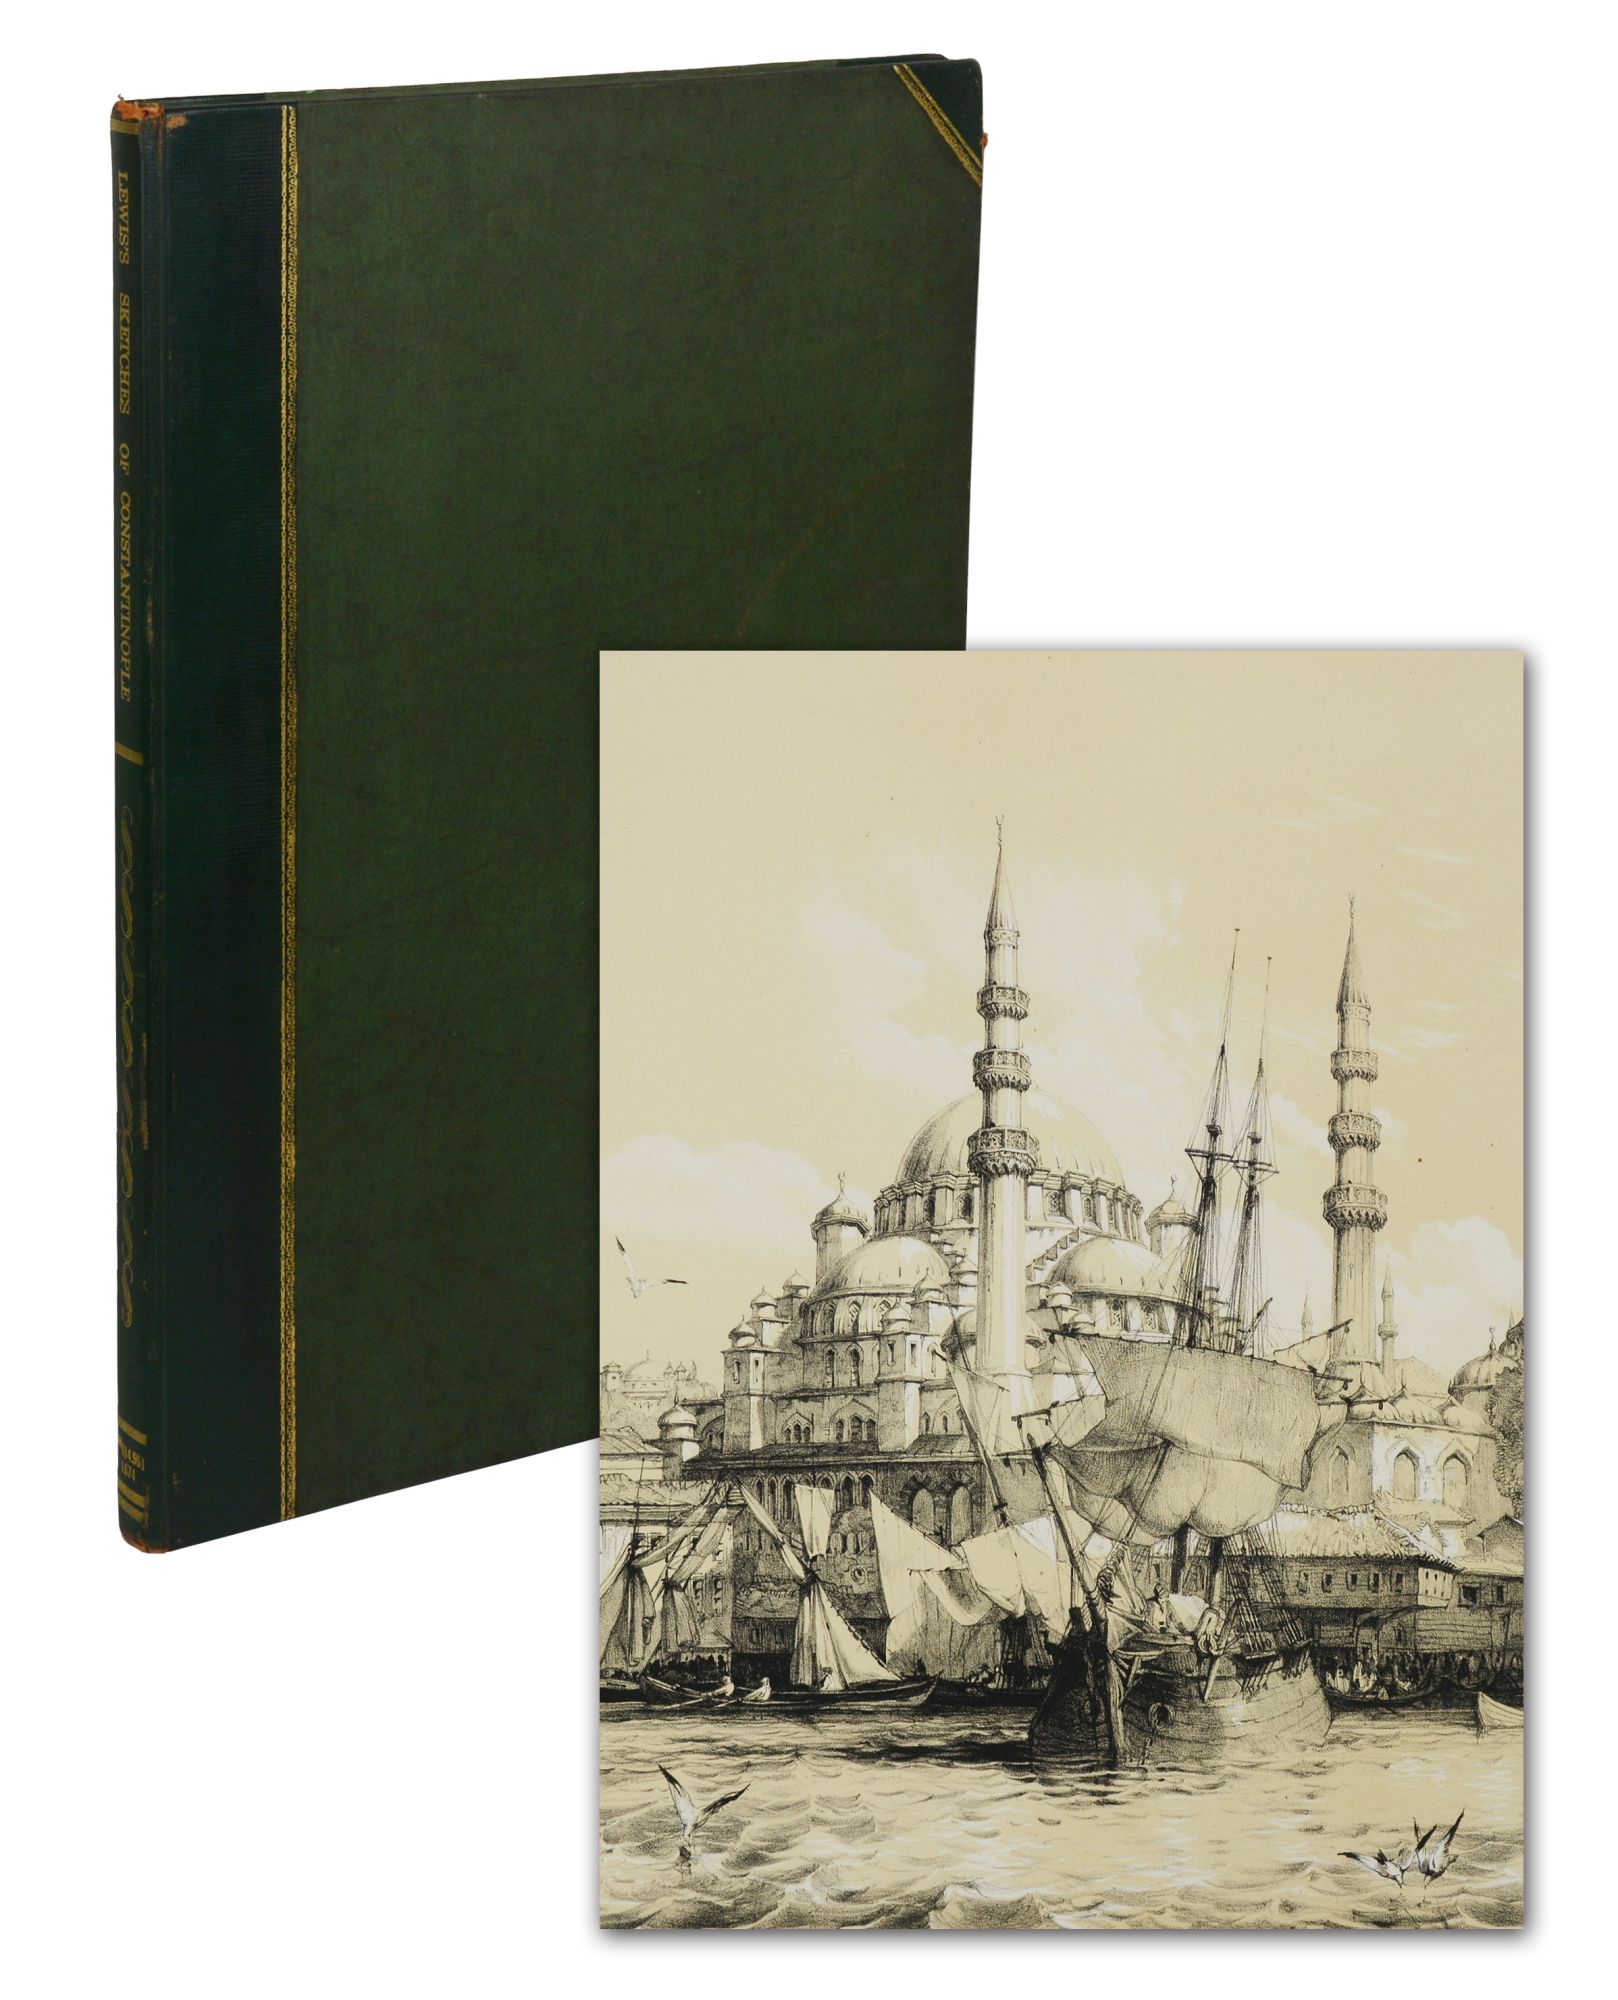 Lewis's Illustrations of Constantinople: Made During a Residence in That  City in the Years 1835-6 by John Frederick Lewis on Burnside Rare Books